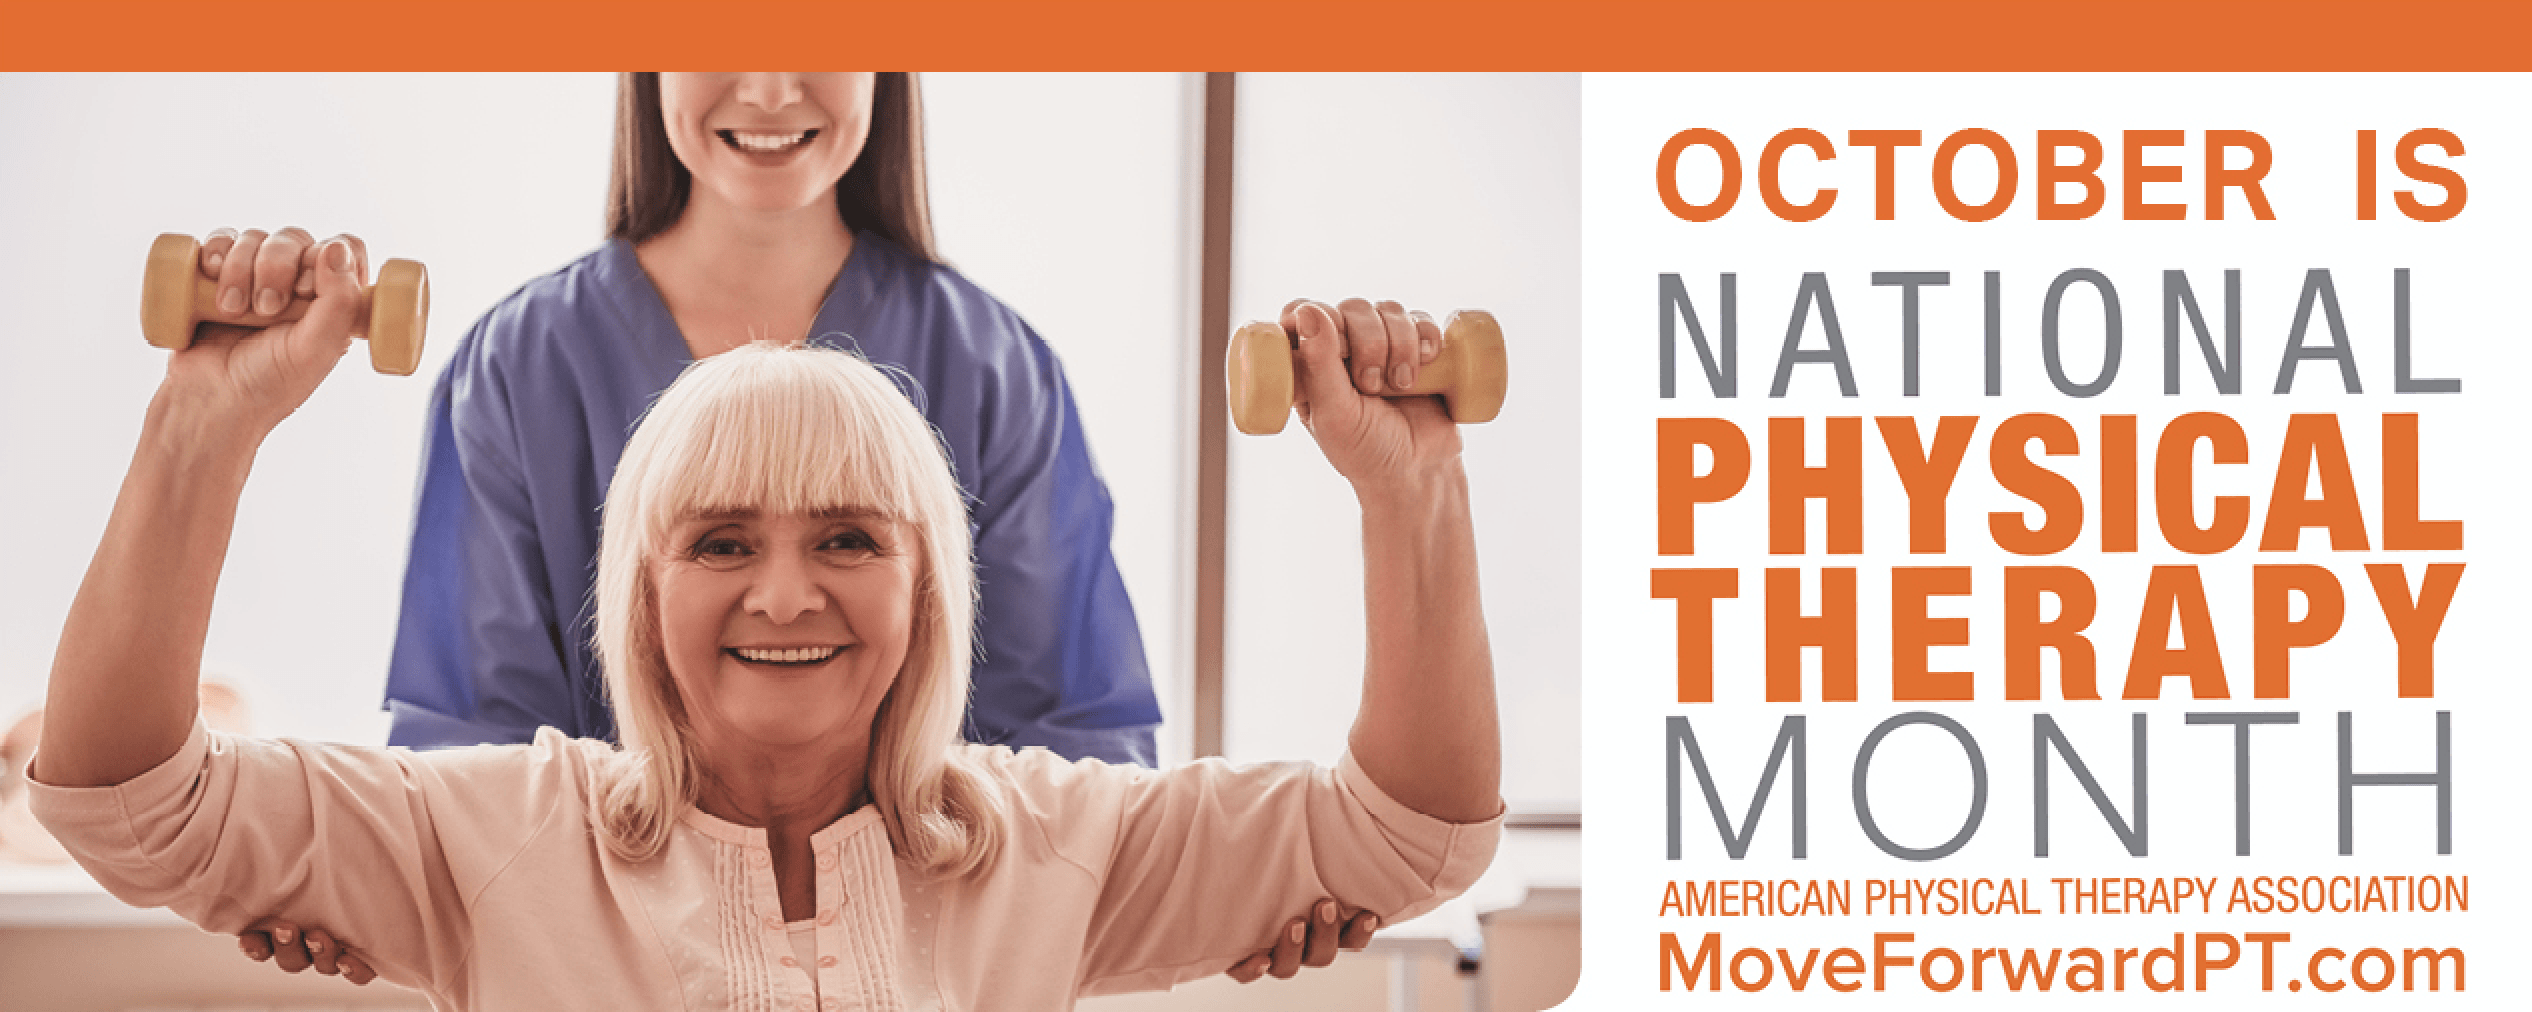 PT Month 2018 Logo - October is Physical Therapy Month Therapy Services